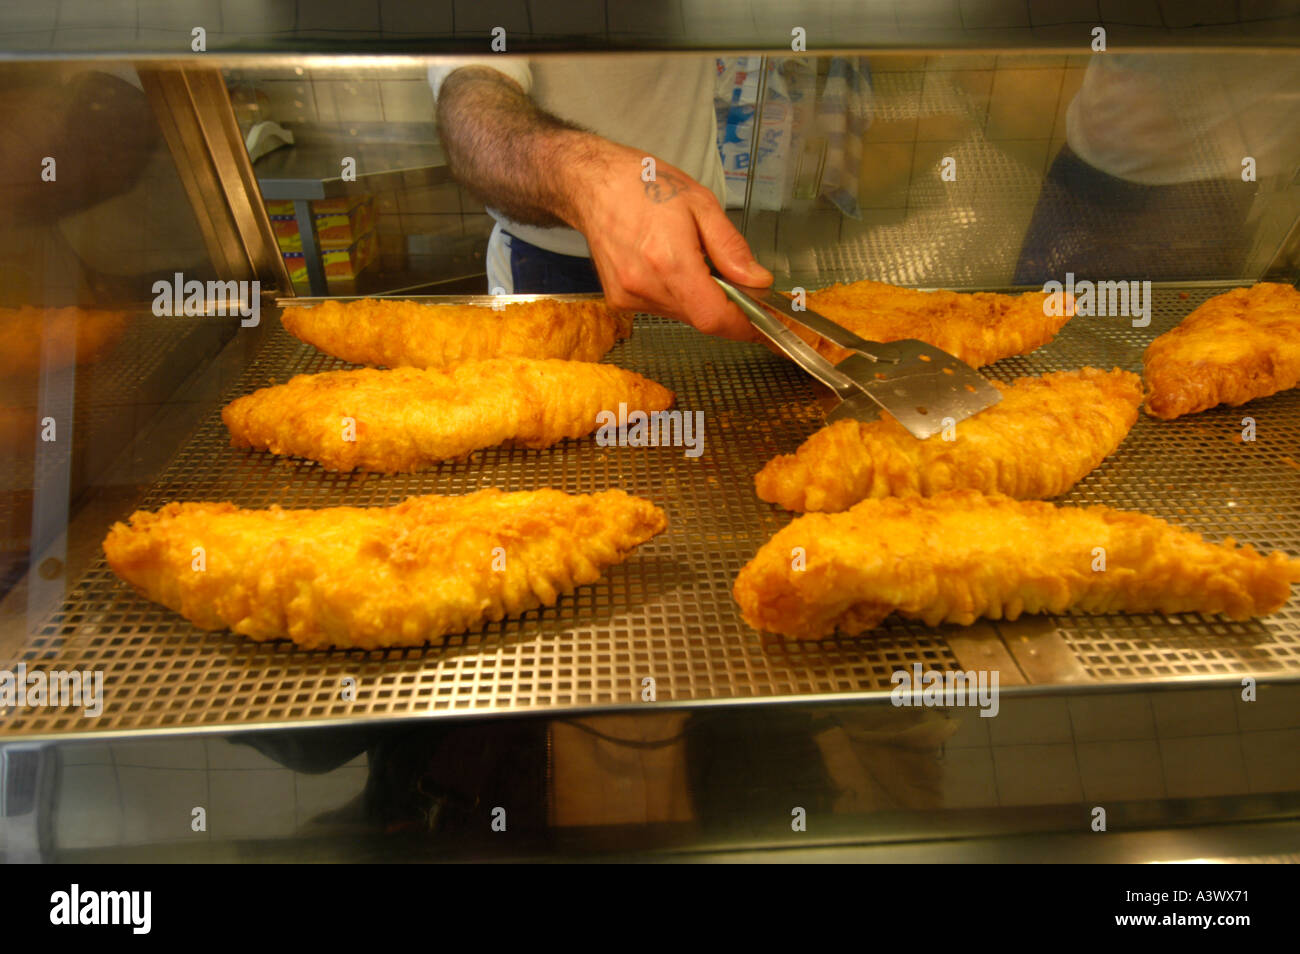 Cod fried in batter at fish and chips shop, England, UK Stock Photo